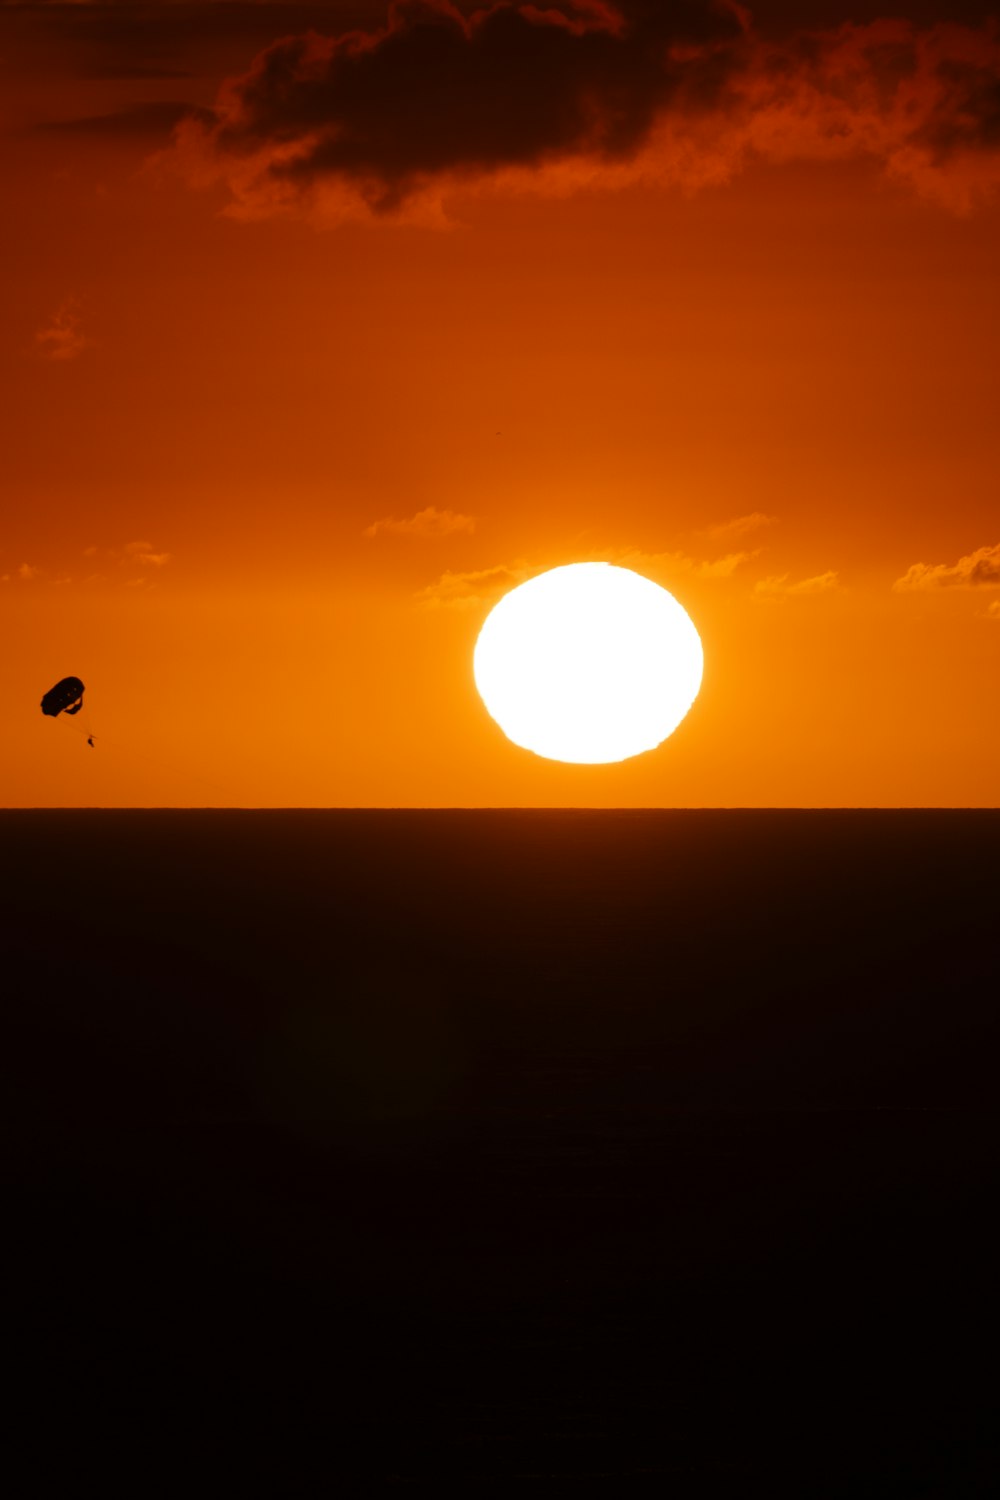 the sun is setting over the horizon of a large body of water